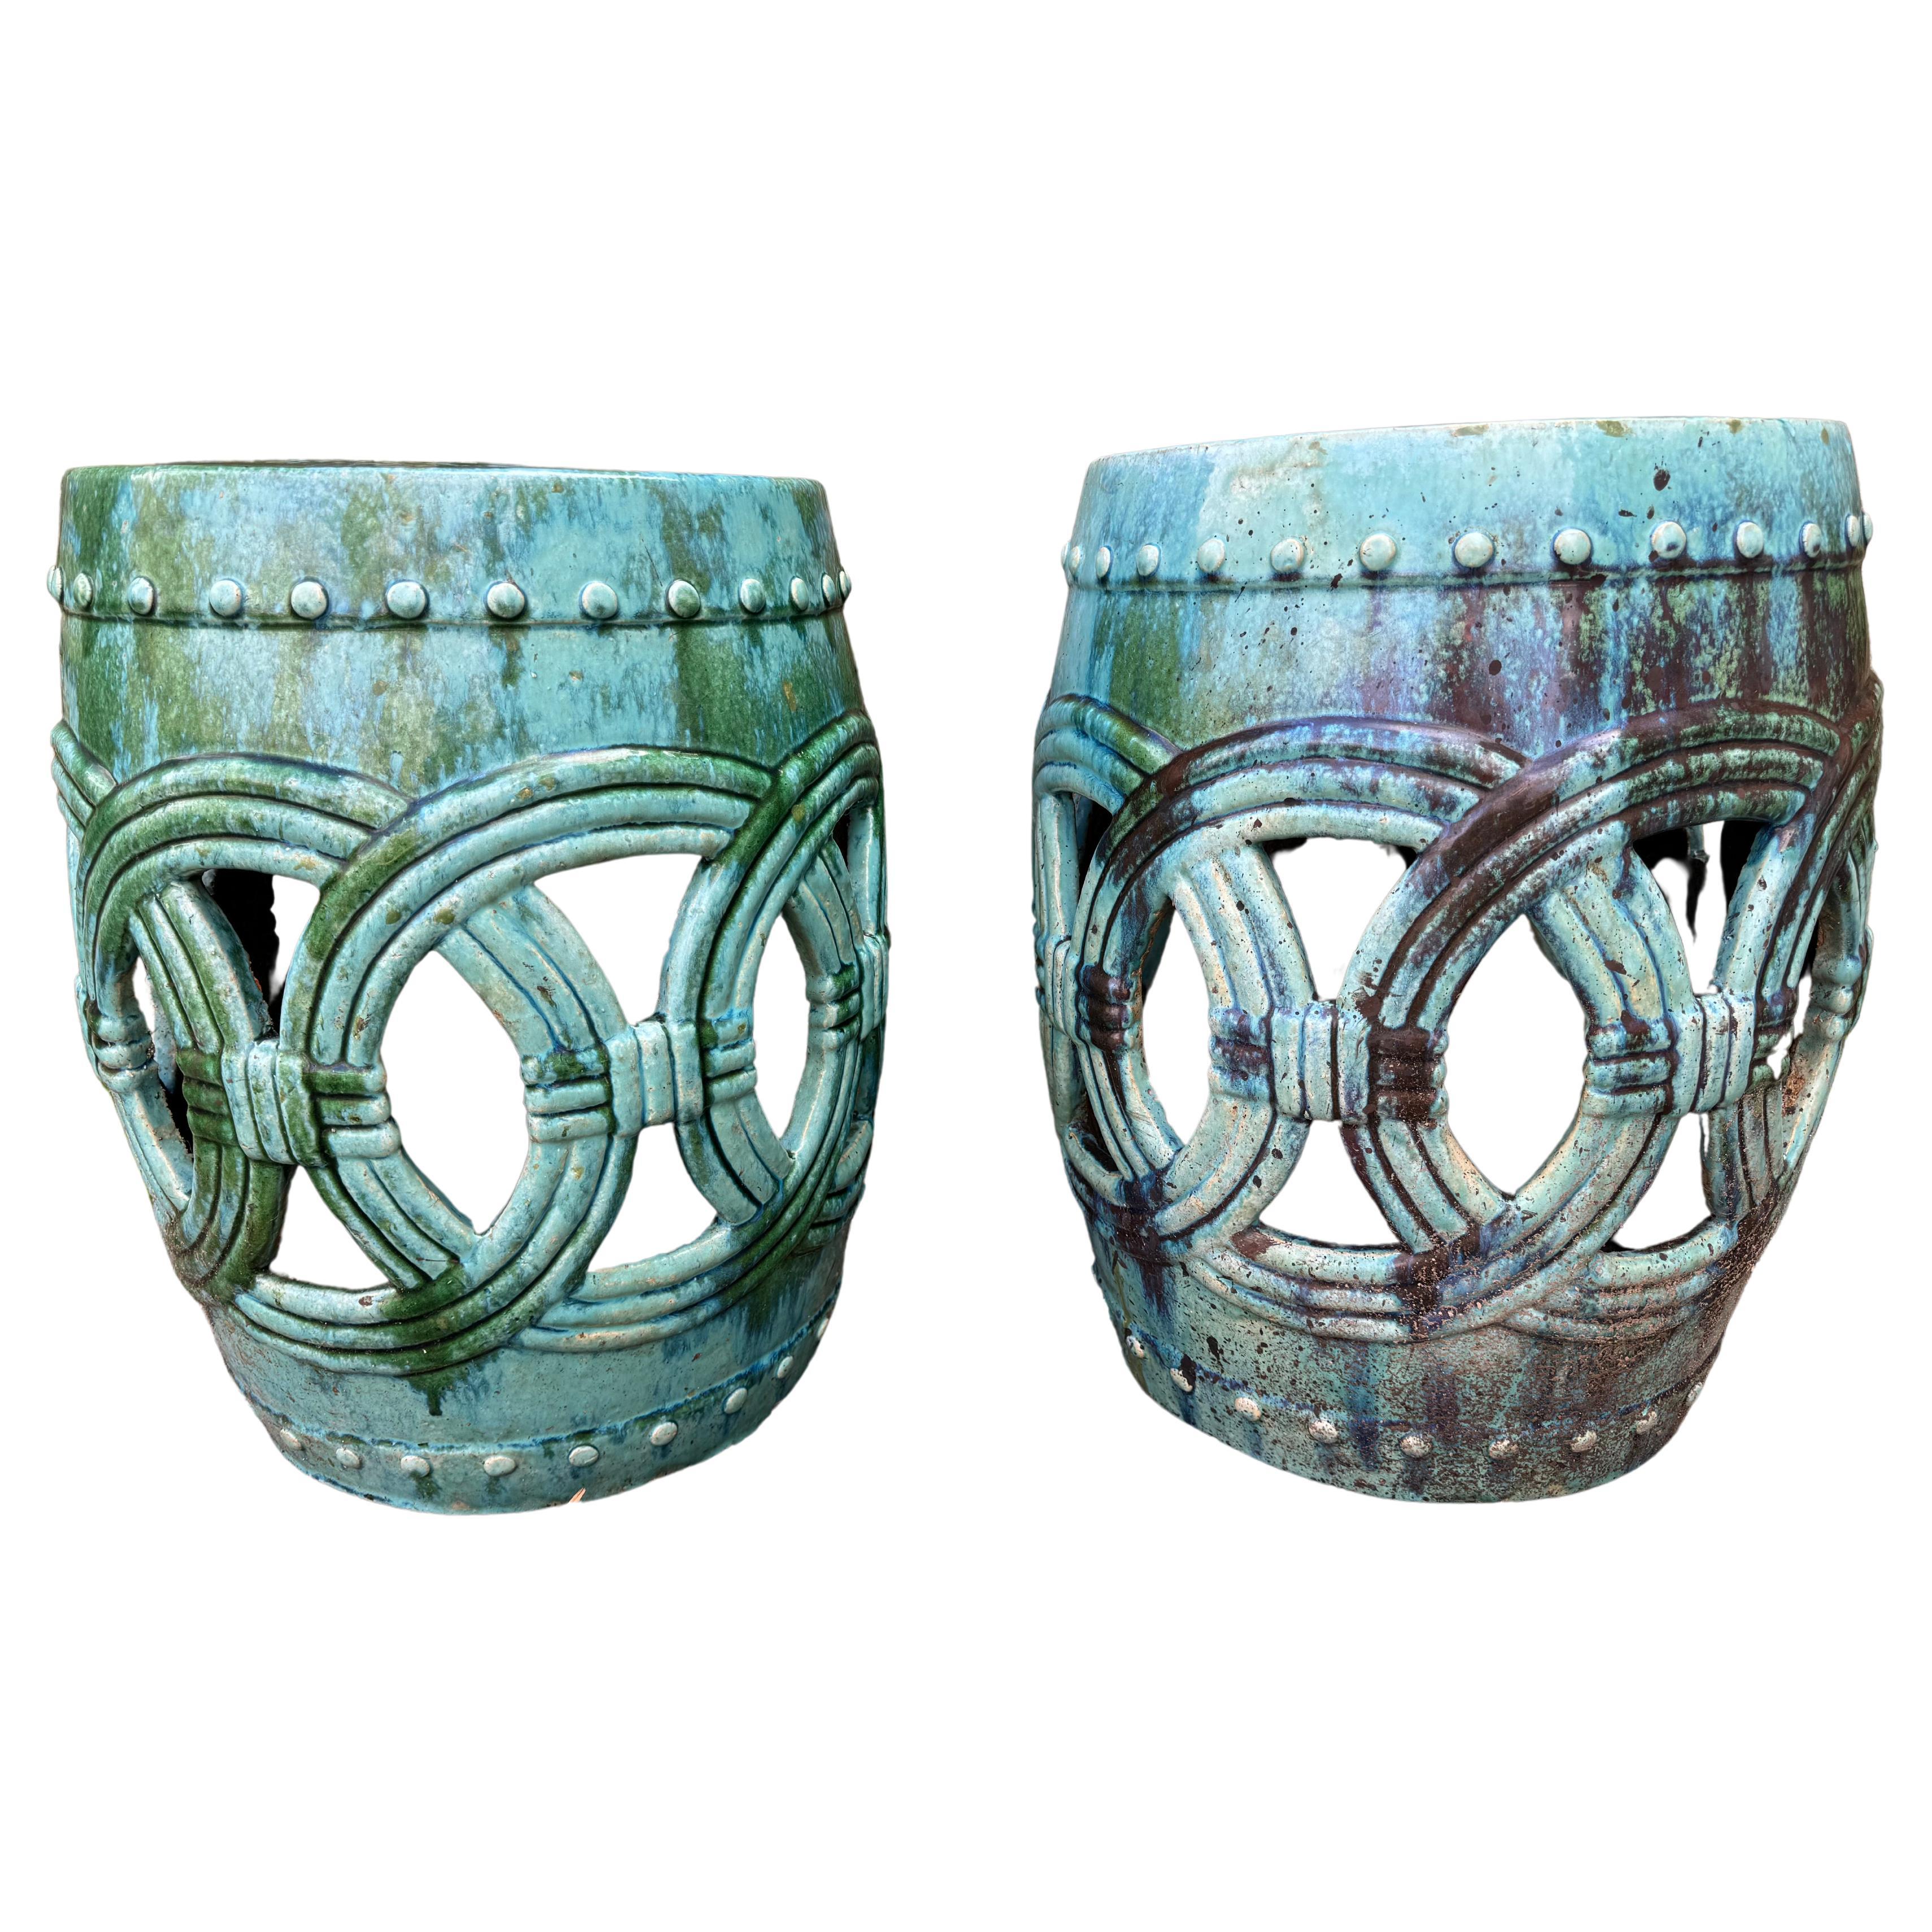 Pair of Turquoise Glazed Reticulated Garden Seats End Tables